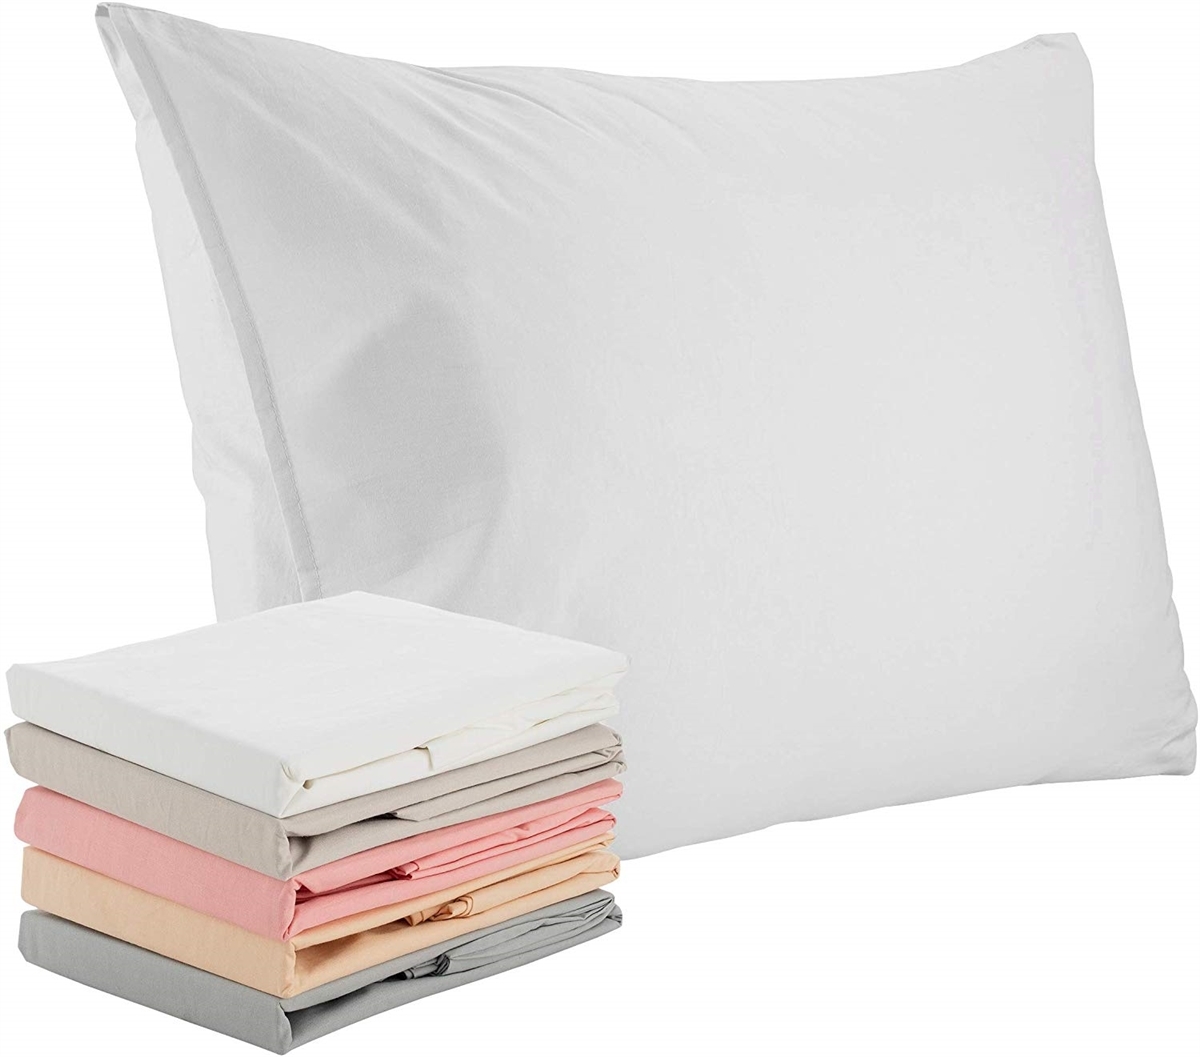 Superior Linen Set of 2 Pillow Cases in White